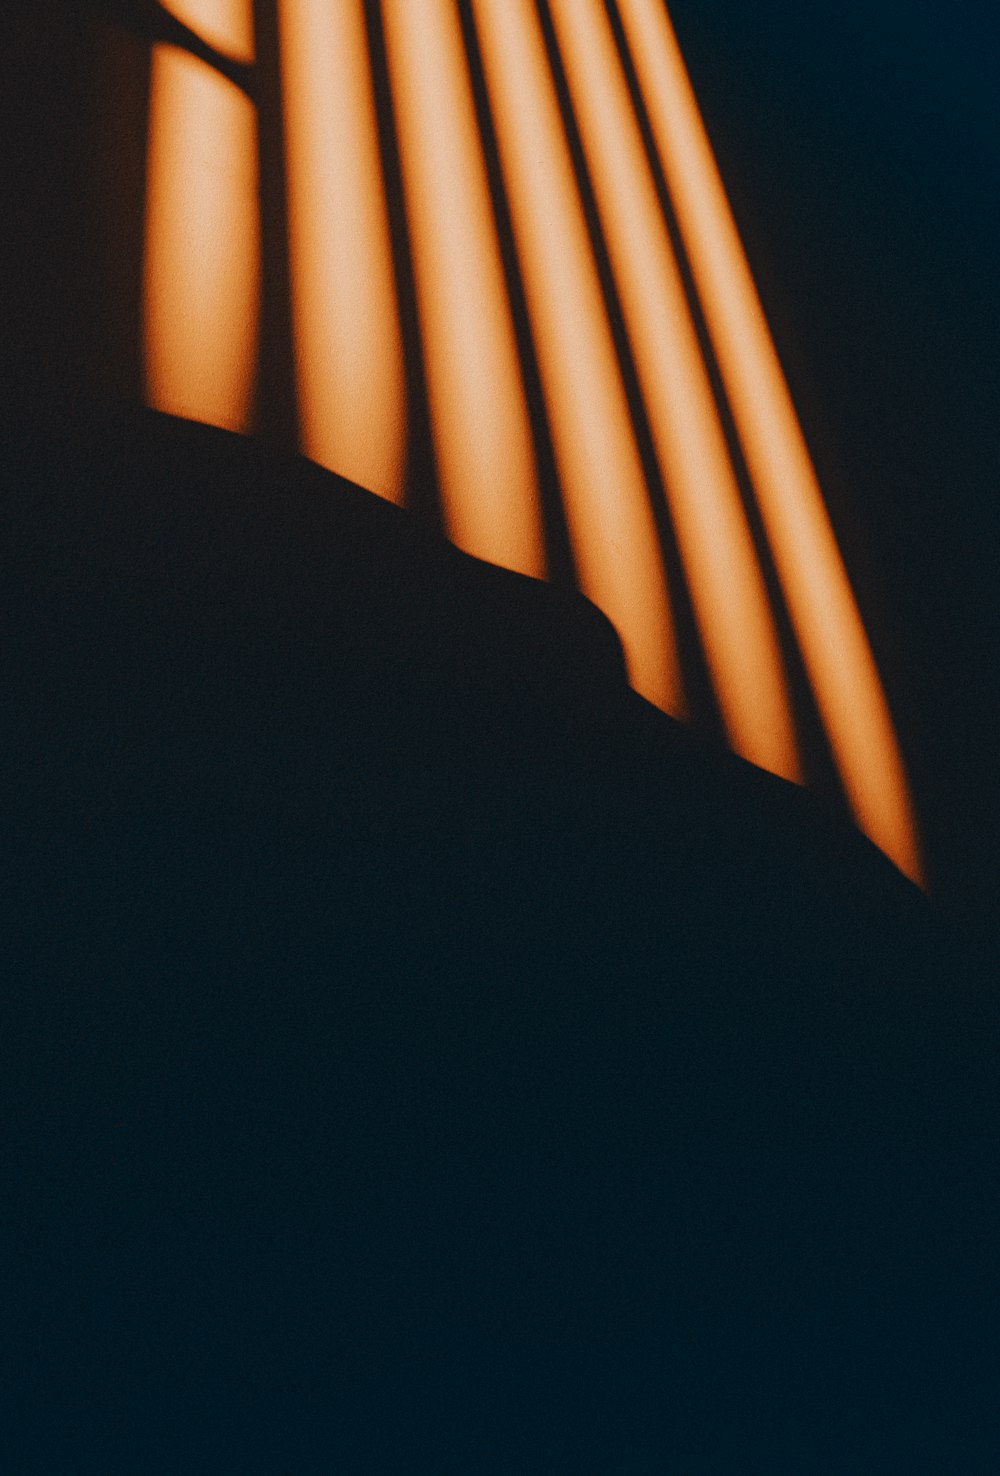 a black and orange photo of a light coming through a window